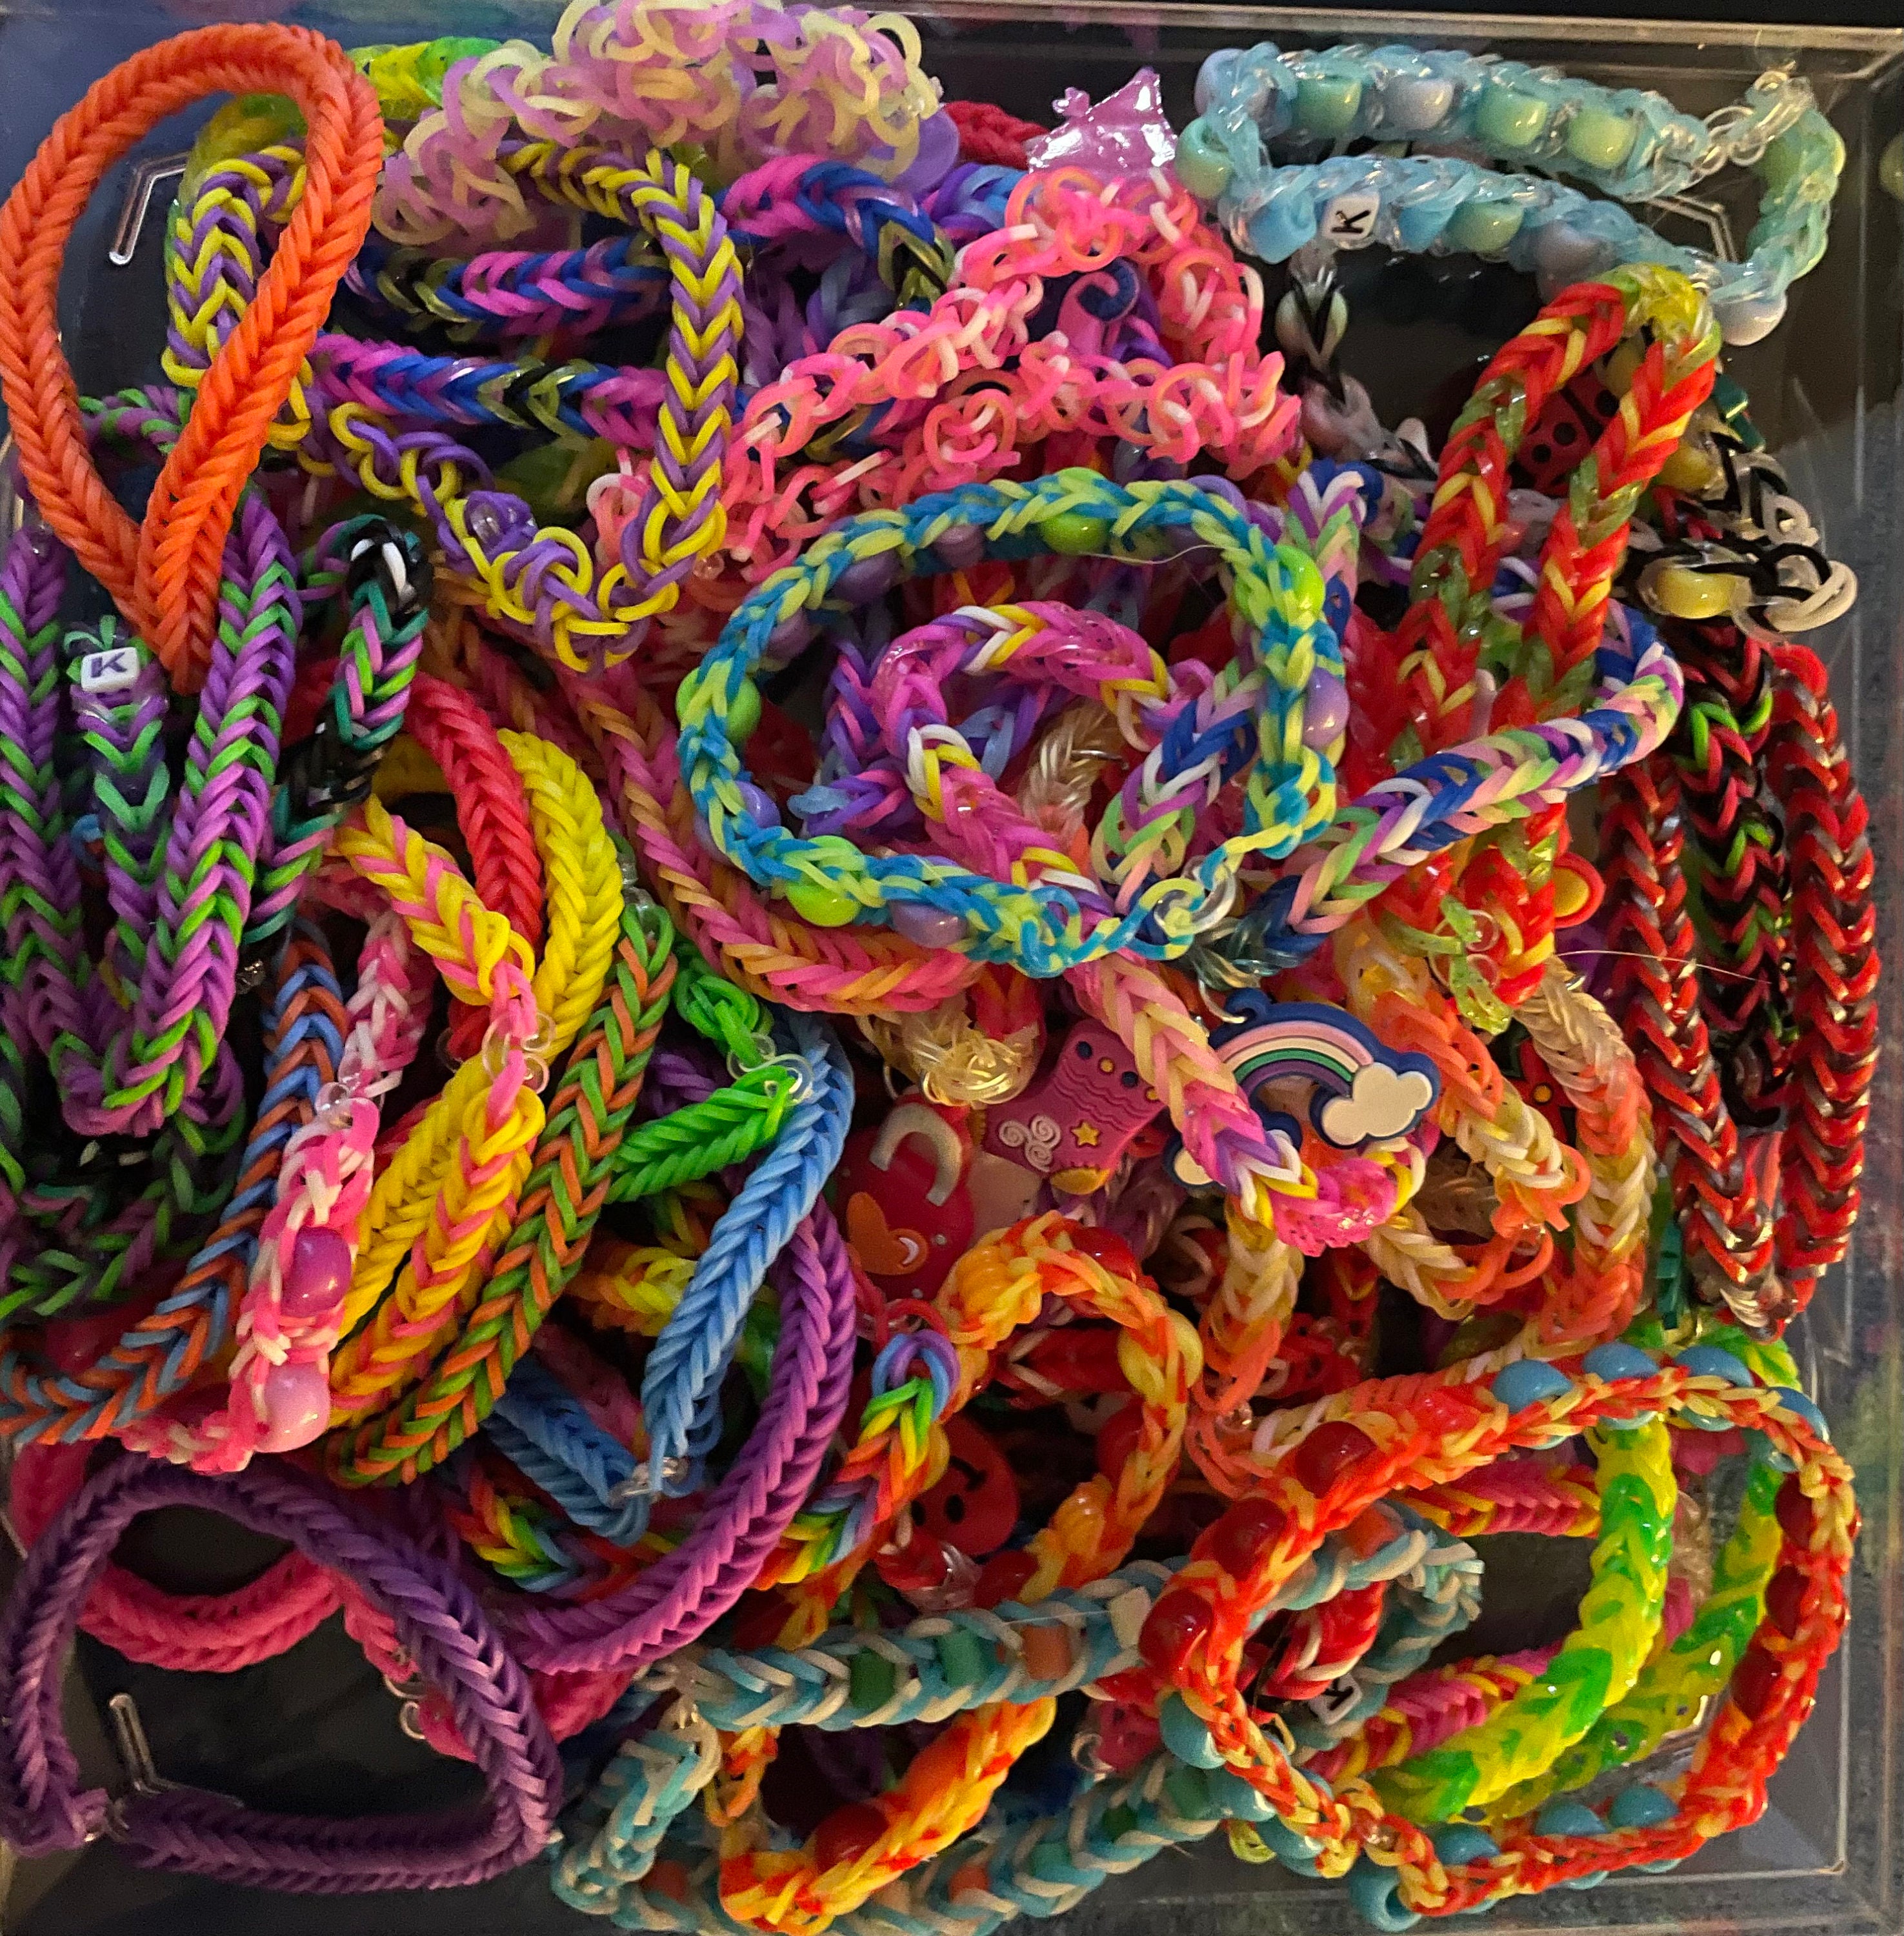  Rainbow Loom Mother-of-Pearl Rubber Bands Refill - 600